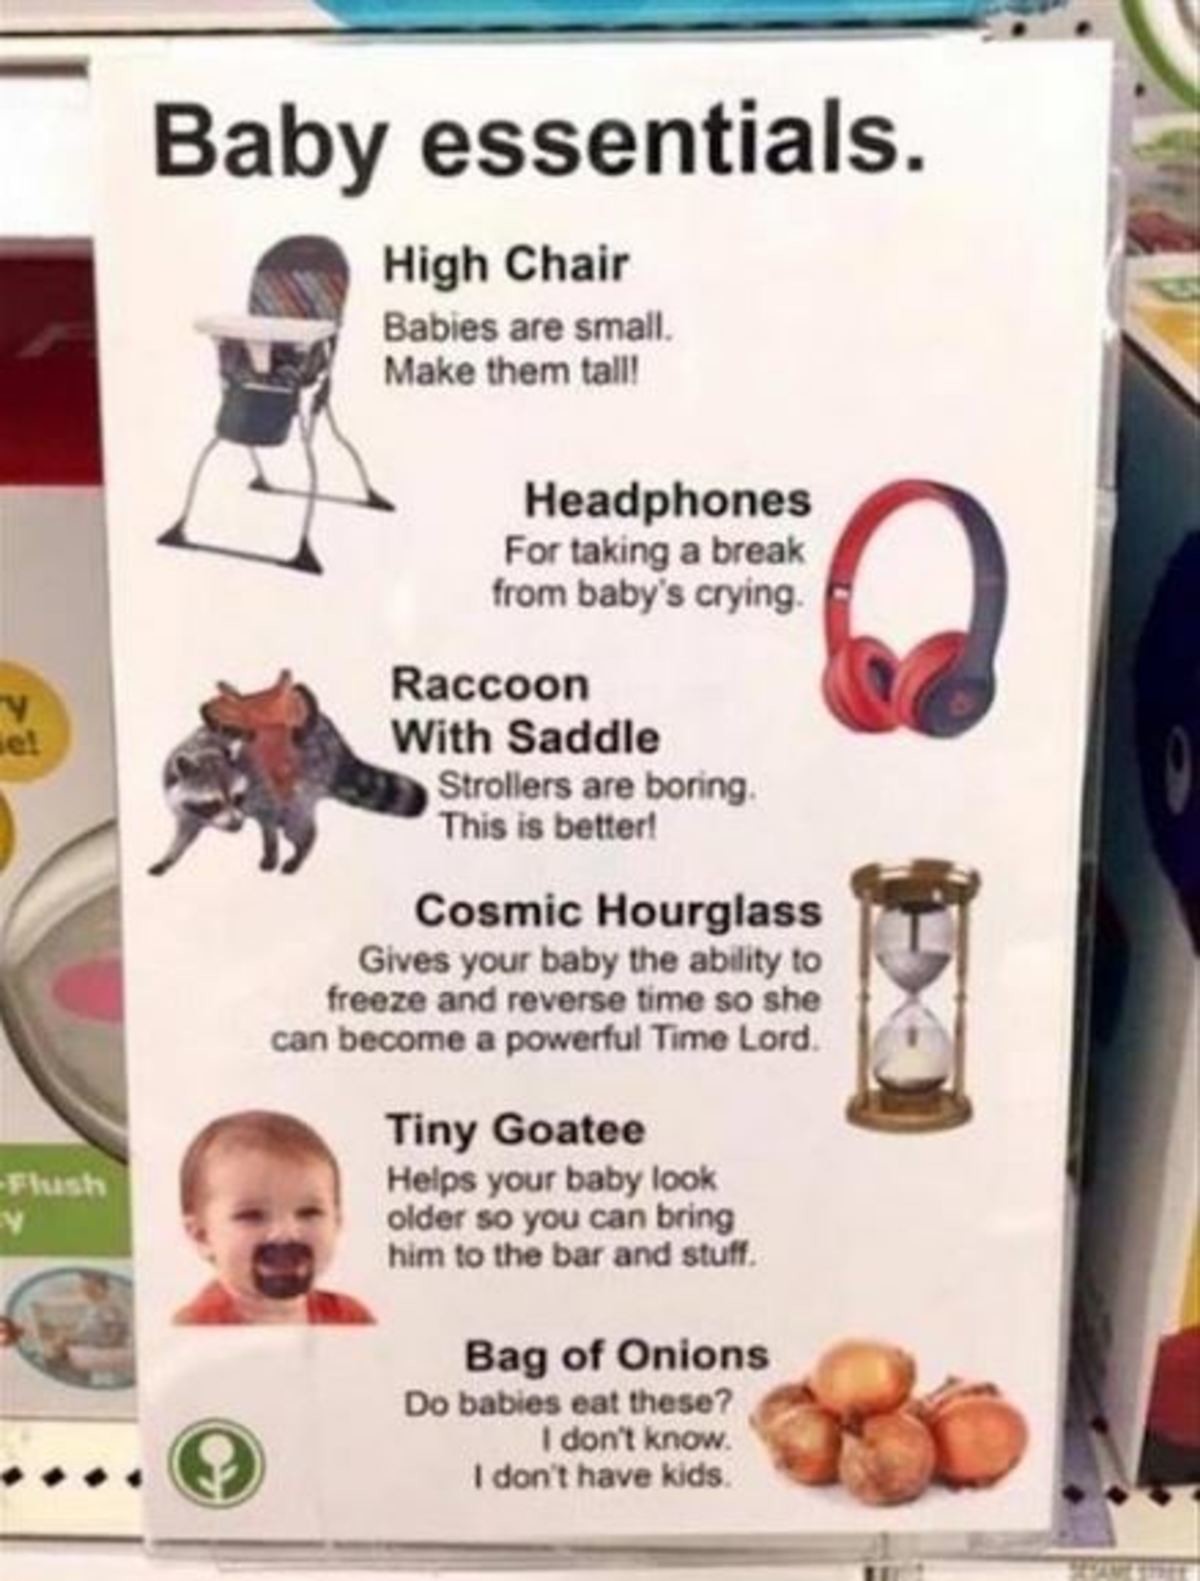 They Forgot Benadryl. . Baby essentials. High Chair are smut Cosmic HourglassIt sucks buthert i read read as read ' ttd not read, SK) I have to read as; read so